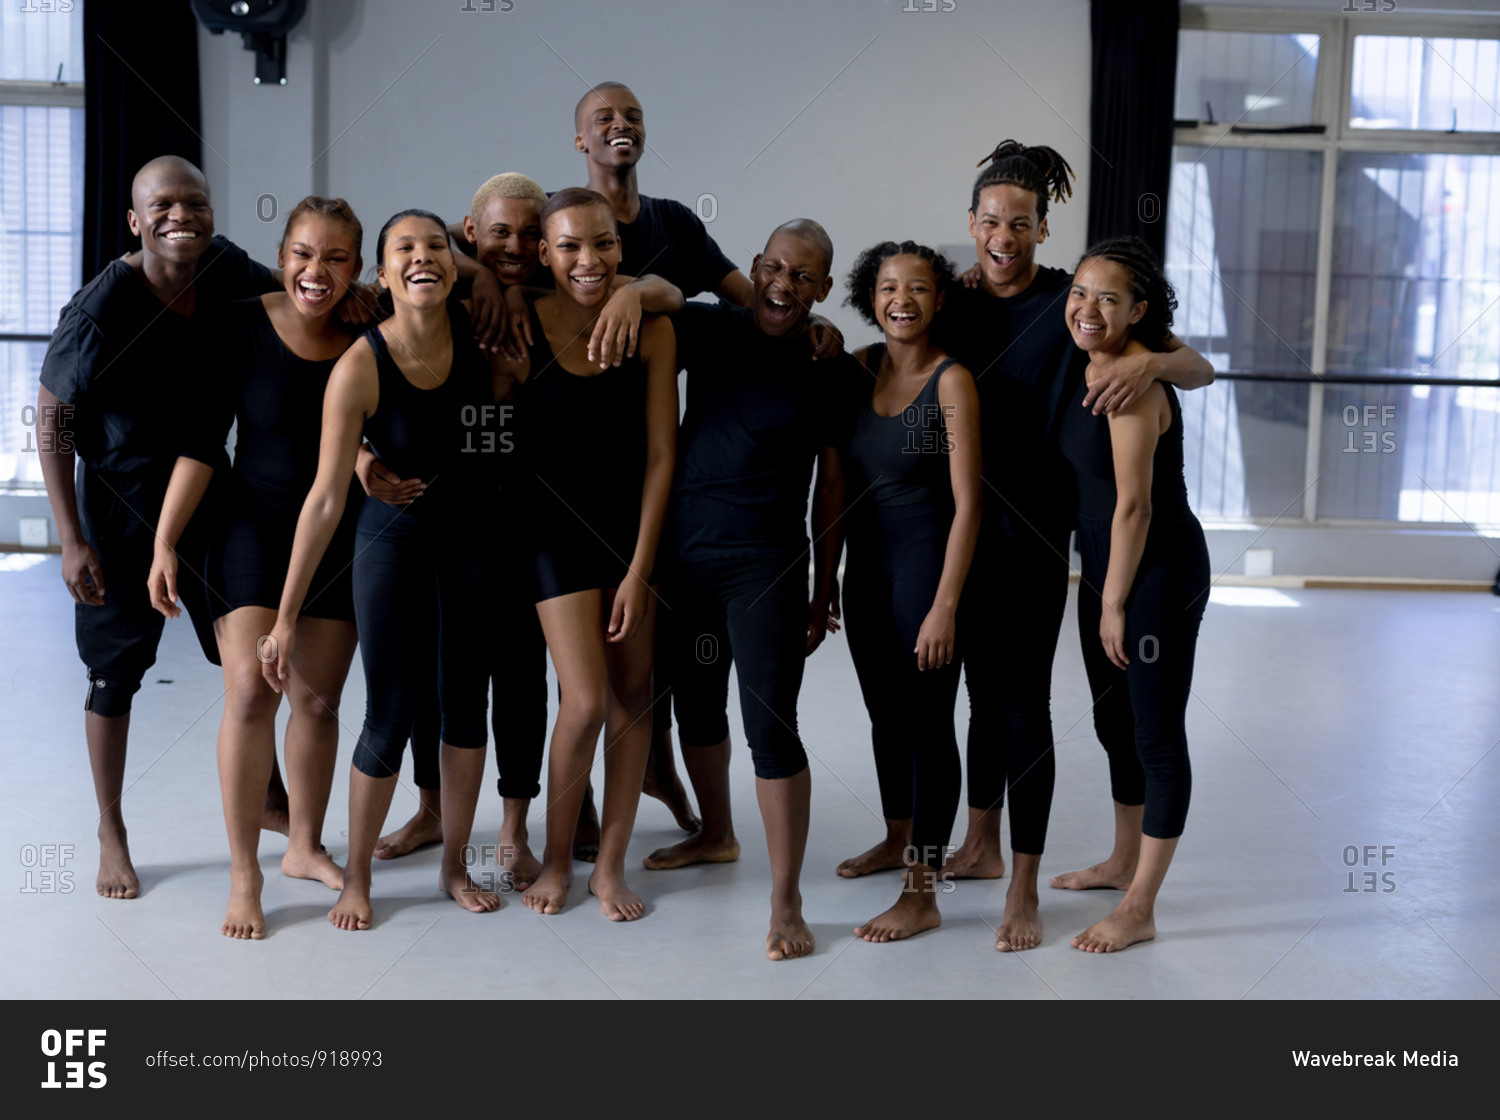 Front view of a multi-ethnic group of fit male and female modern dancers wearing black outfits practicing a dance routine during a dance class in a bright studio, standing together, smiling and looking straight into a camera.